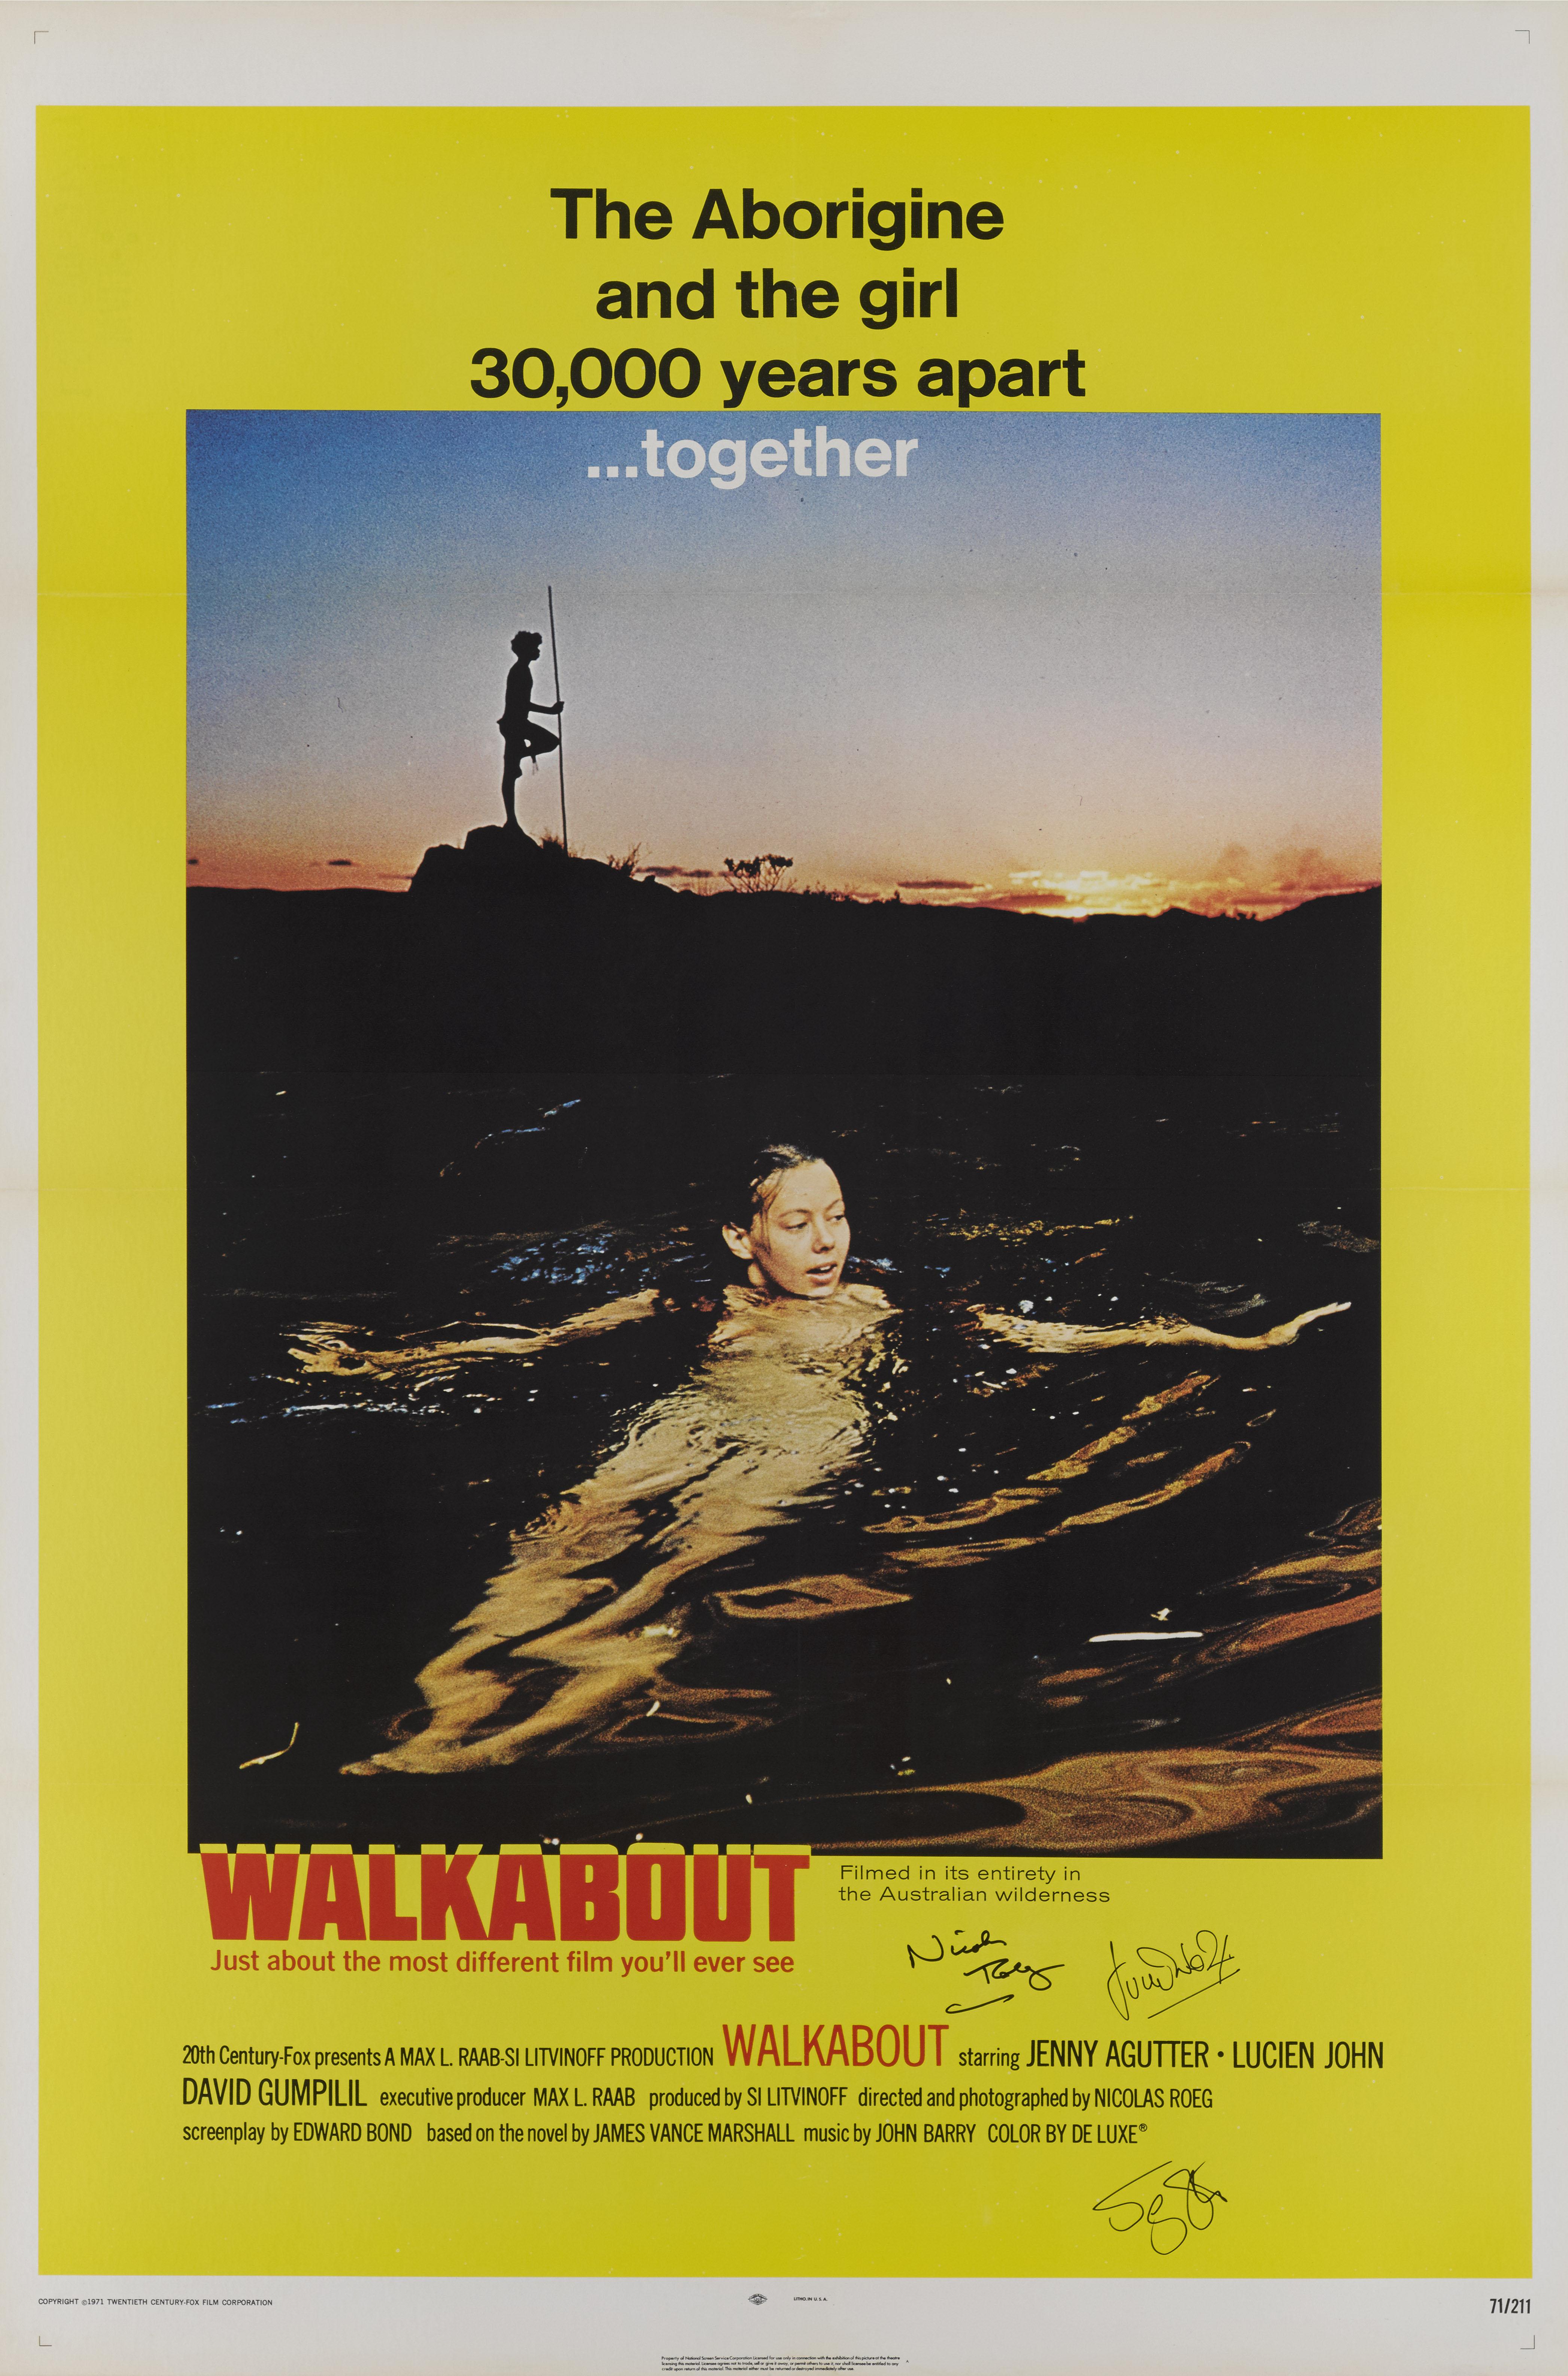 Original US film poster for 1971 film Walkabout. This film was directed by Nicolas Roeg, and stars Jenny Agutter, David Gulpilil and Luc Roeg. It is the story of two siblings from the city, who are inadvertently stranded in the Australian outback.